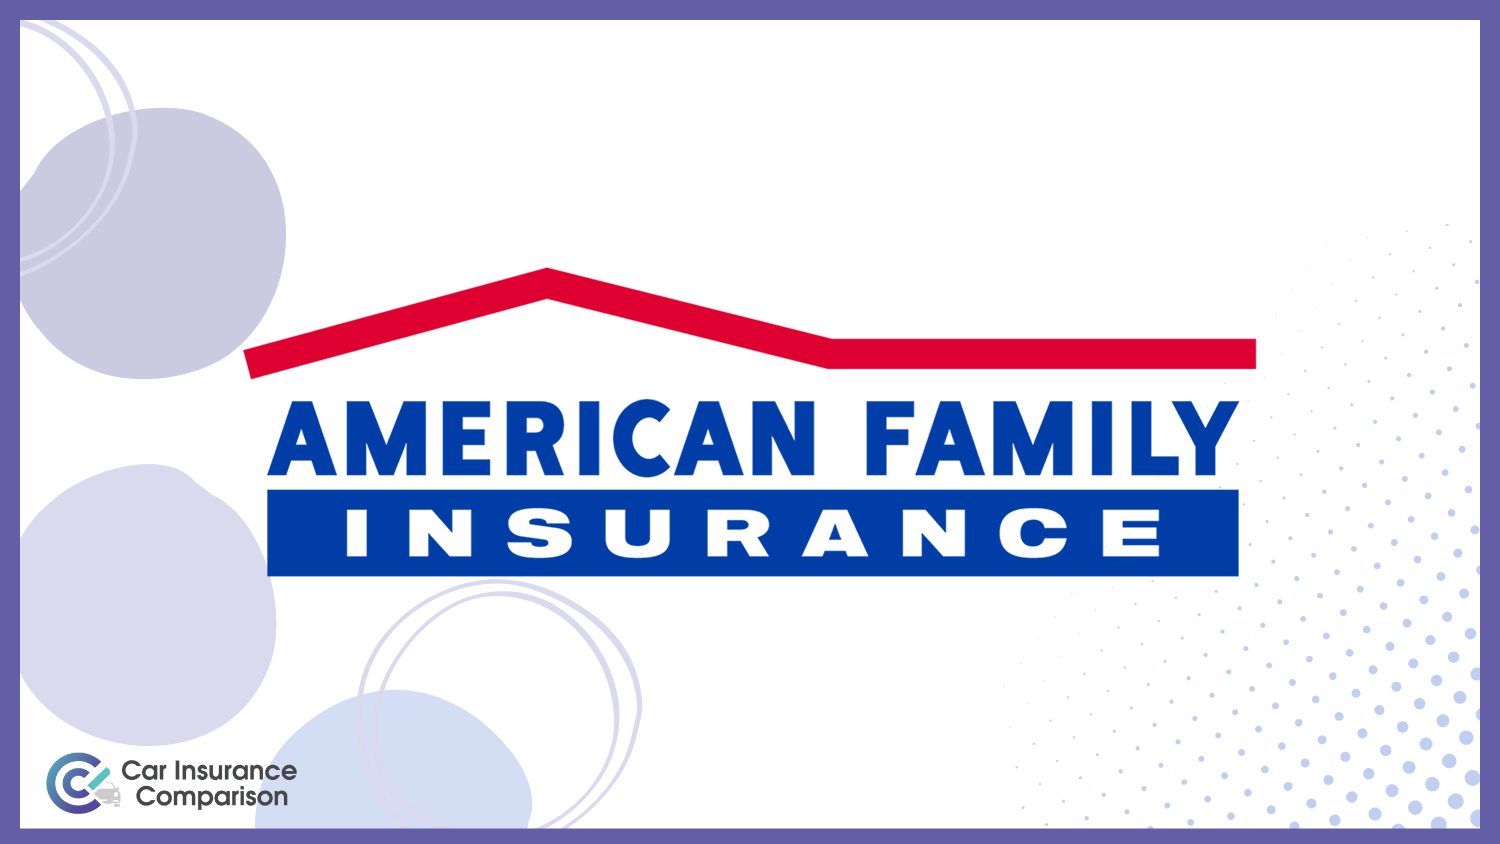 American Family: 10 Best Companies for Bundling Home and Car Insurance